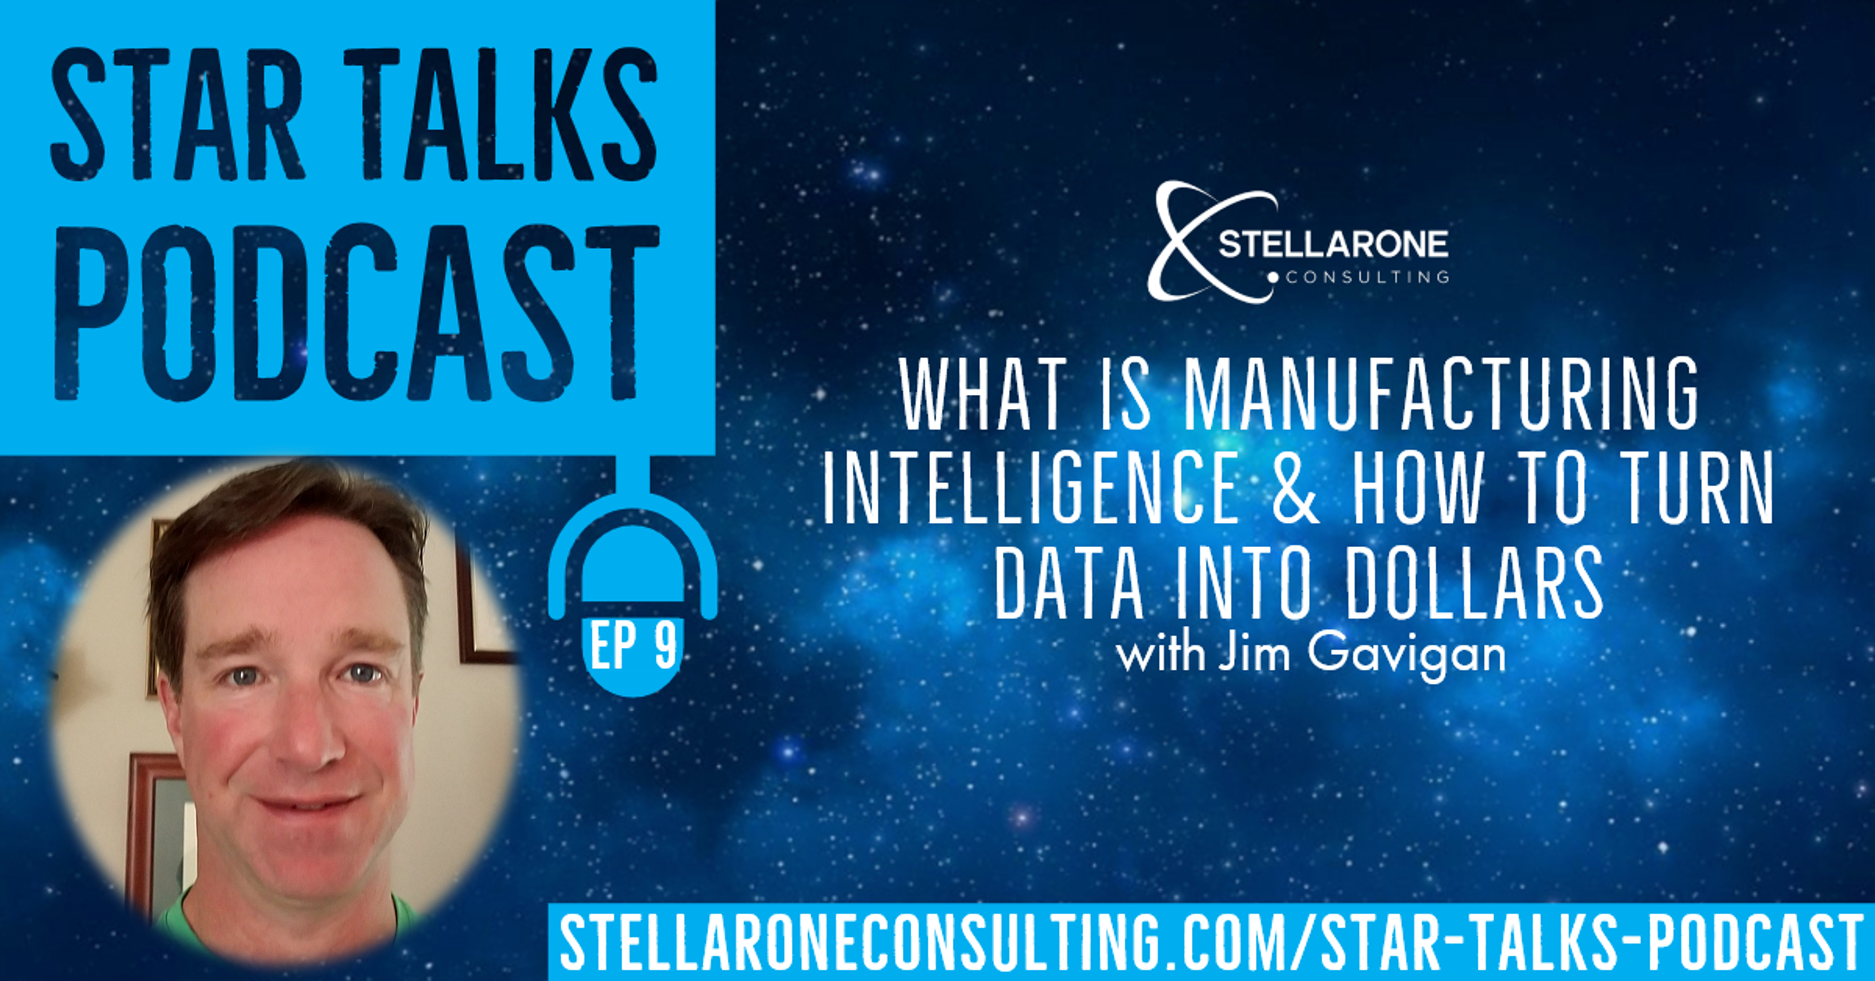 Tim Gavigan, CEO of Industrial Insight on Star Talks Podcast by Stellar One Consulting